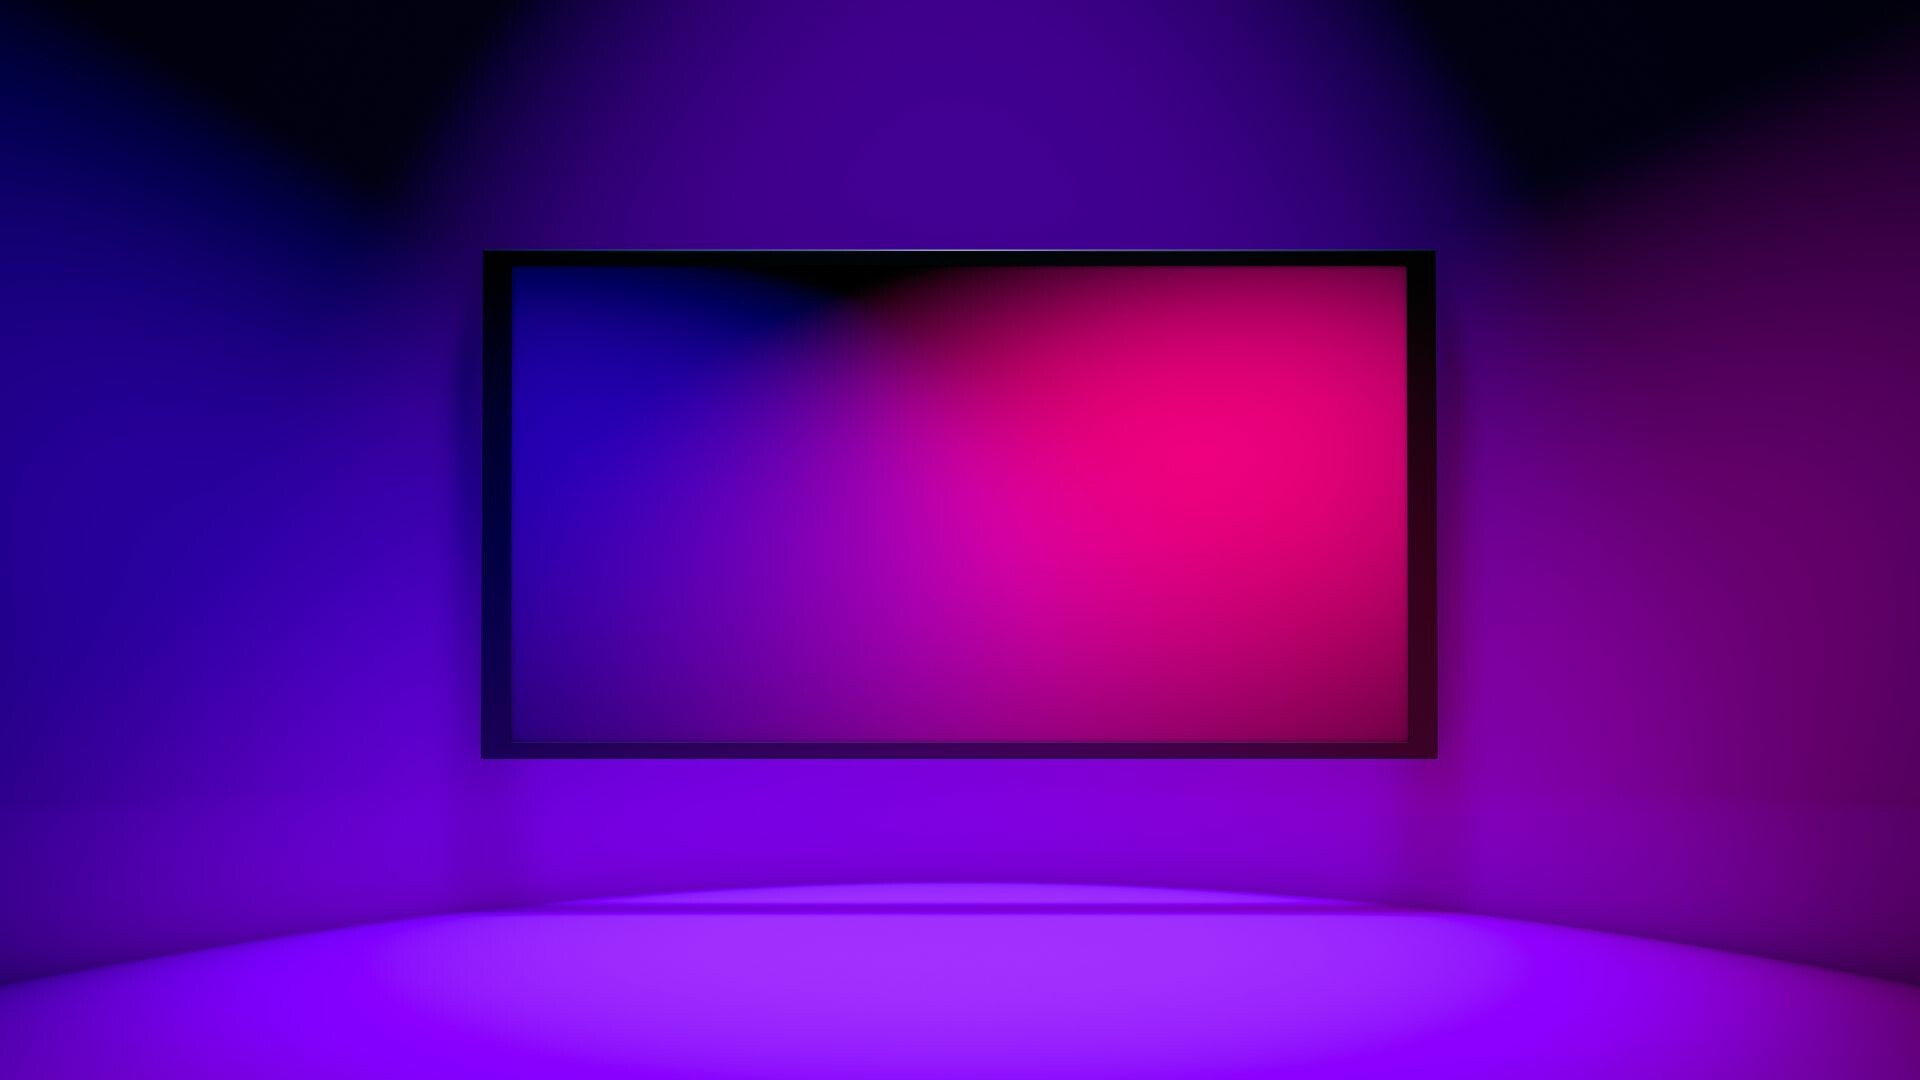 Tv on wall surrounded by neon purple, blue and red lights.